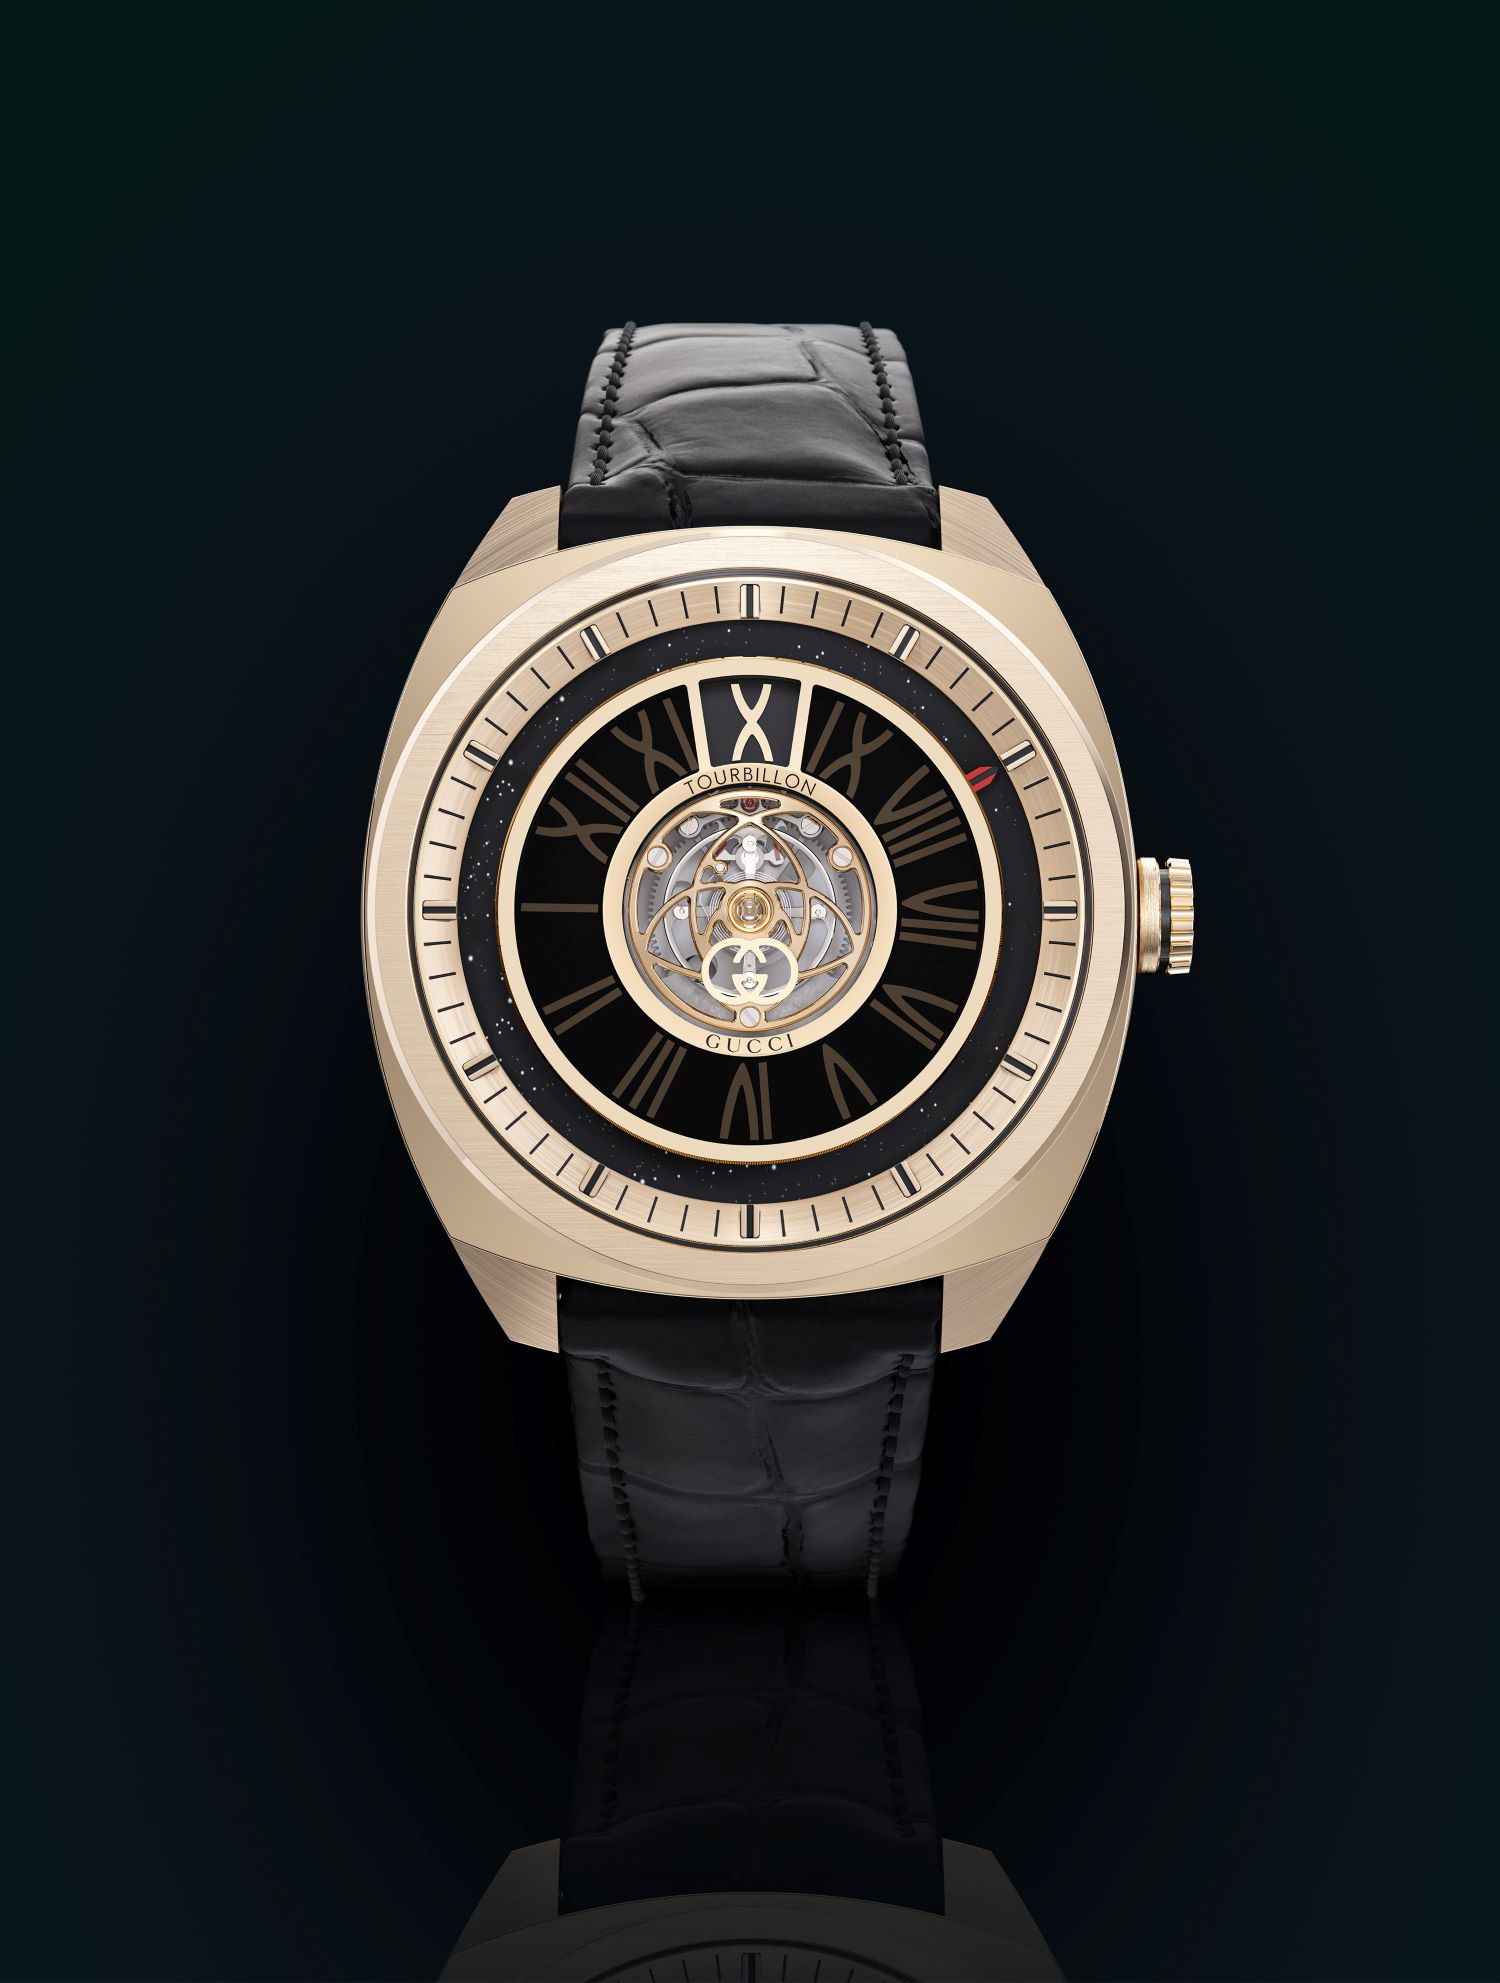 Gucci High Watchmaking Collection | Gucci Interlocking